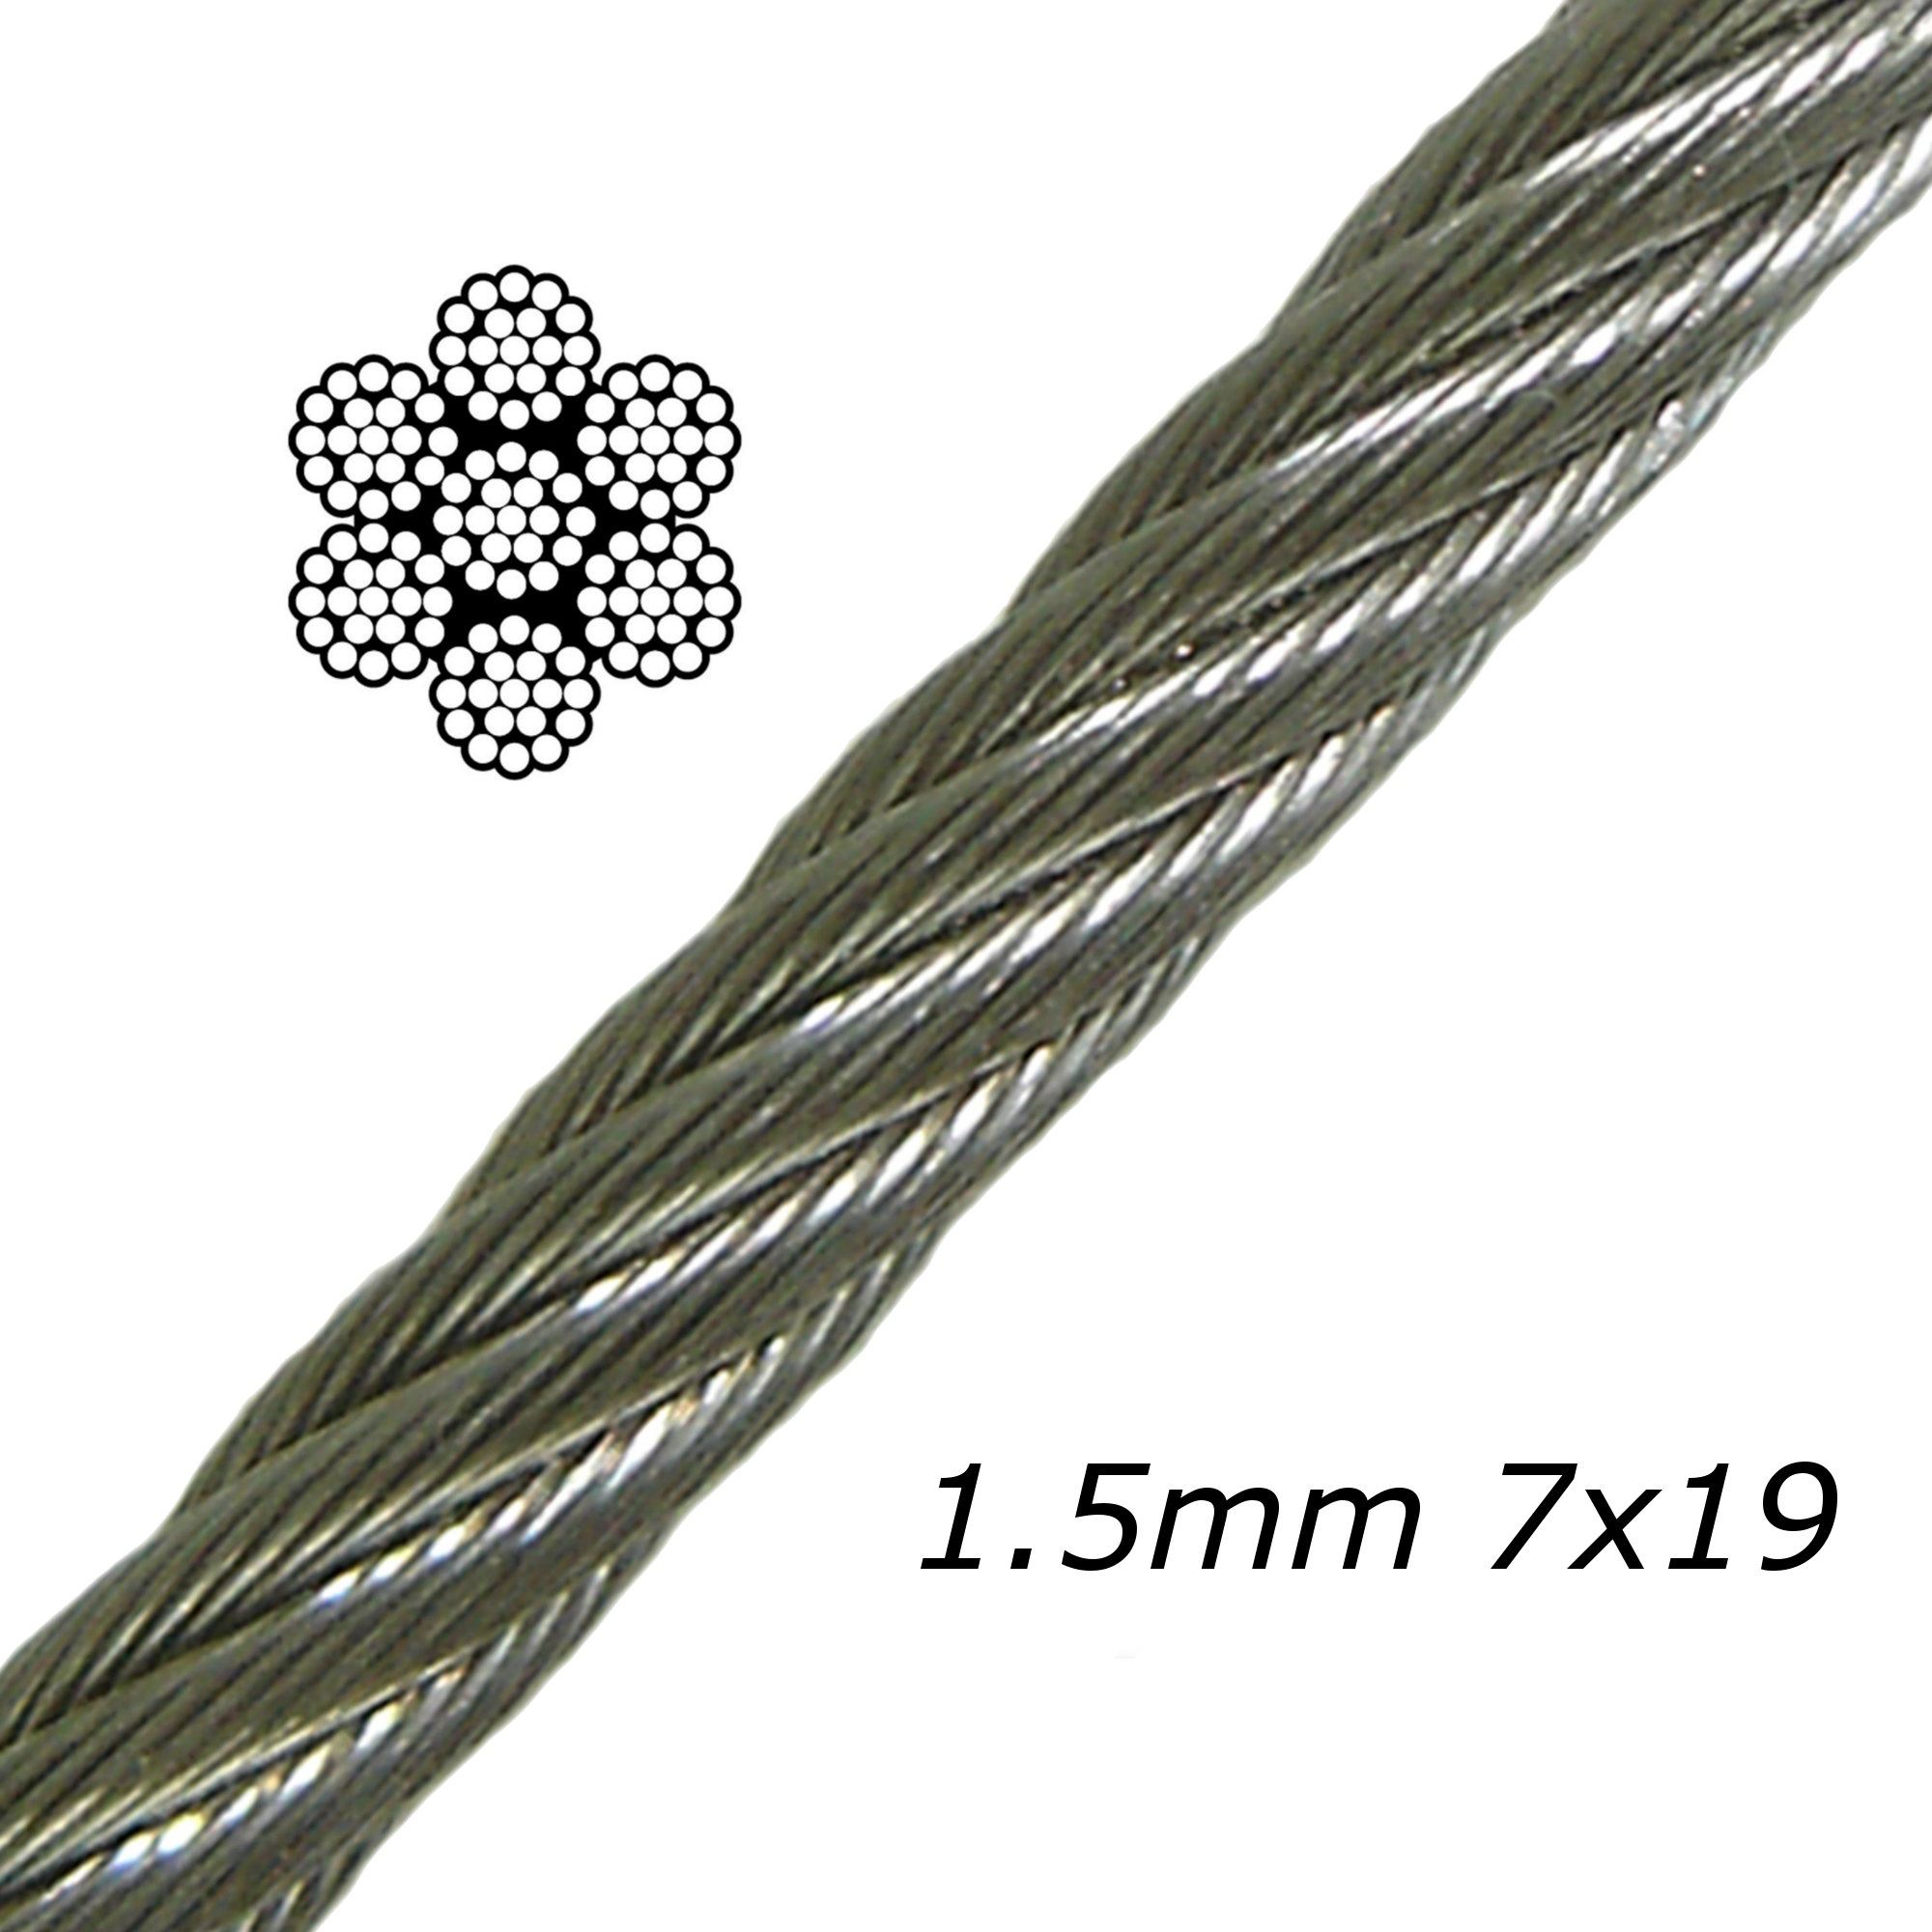 1.5mm Stainless Steel Cable 7x19